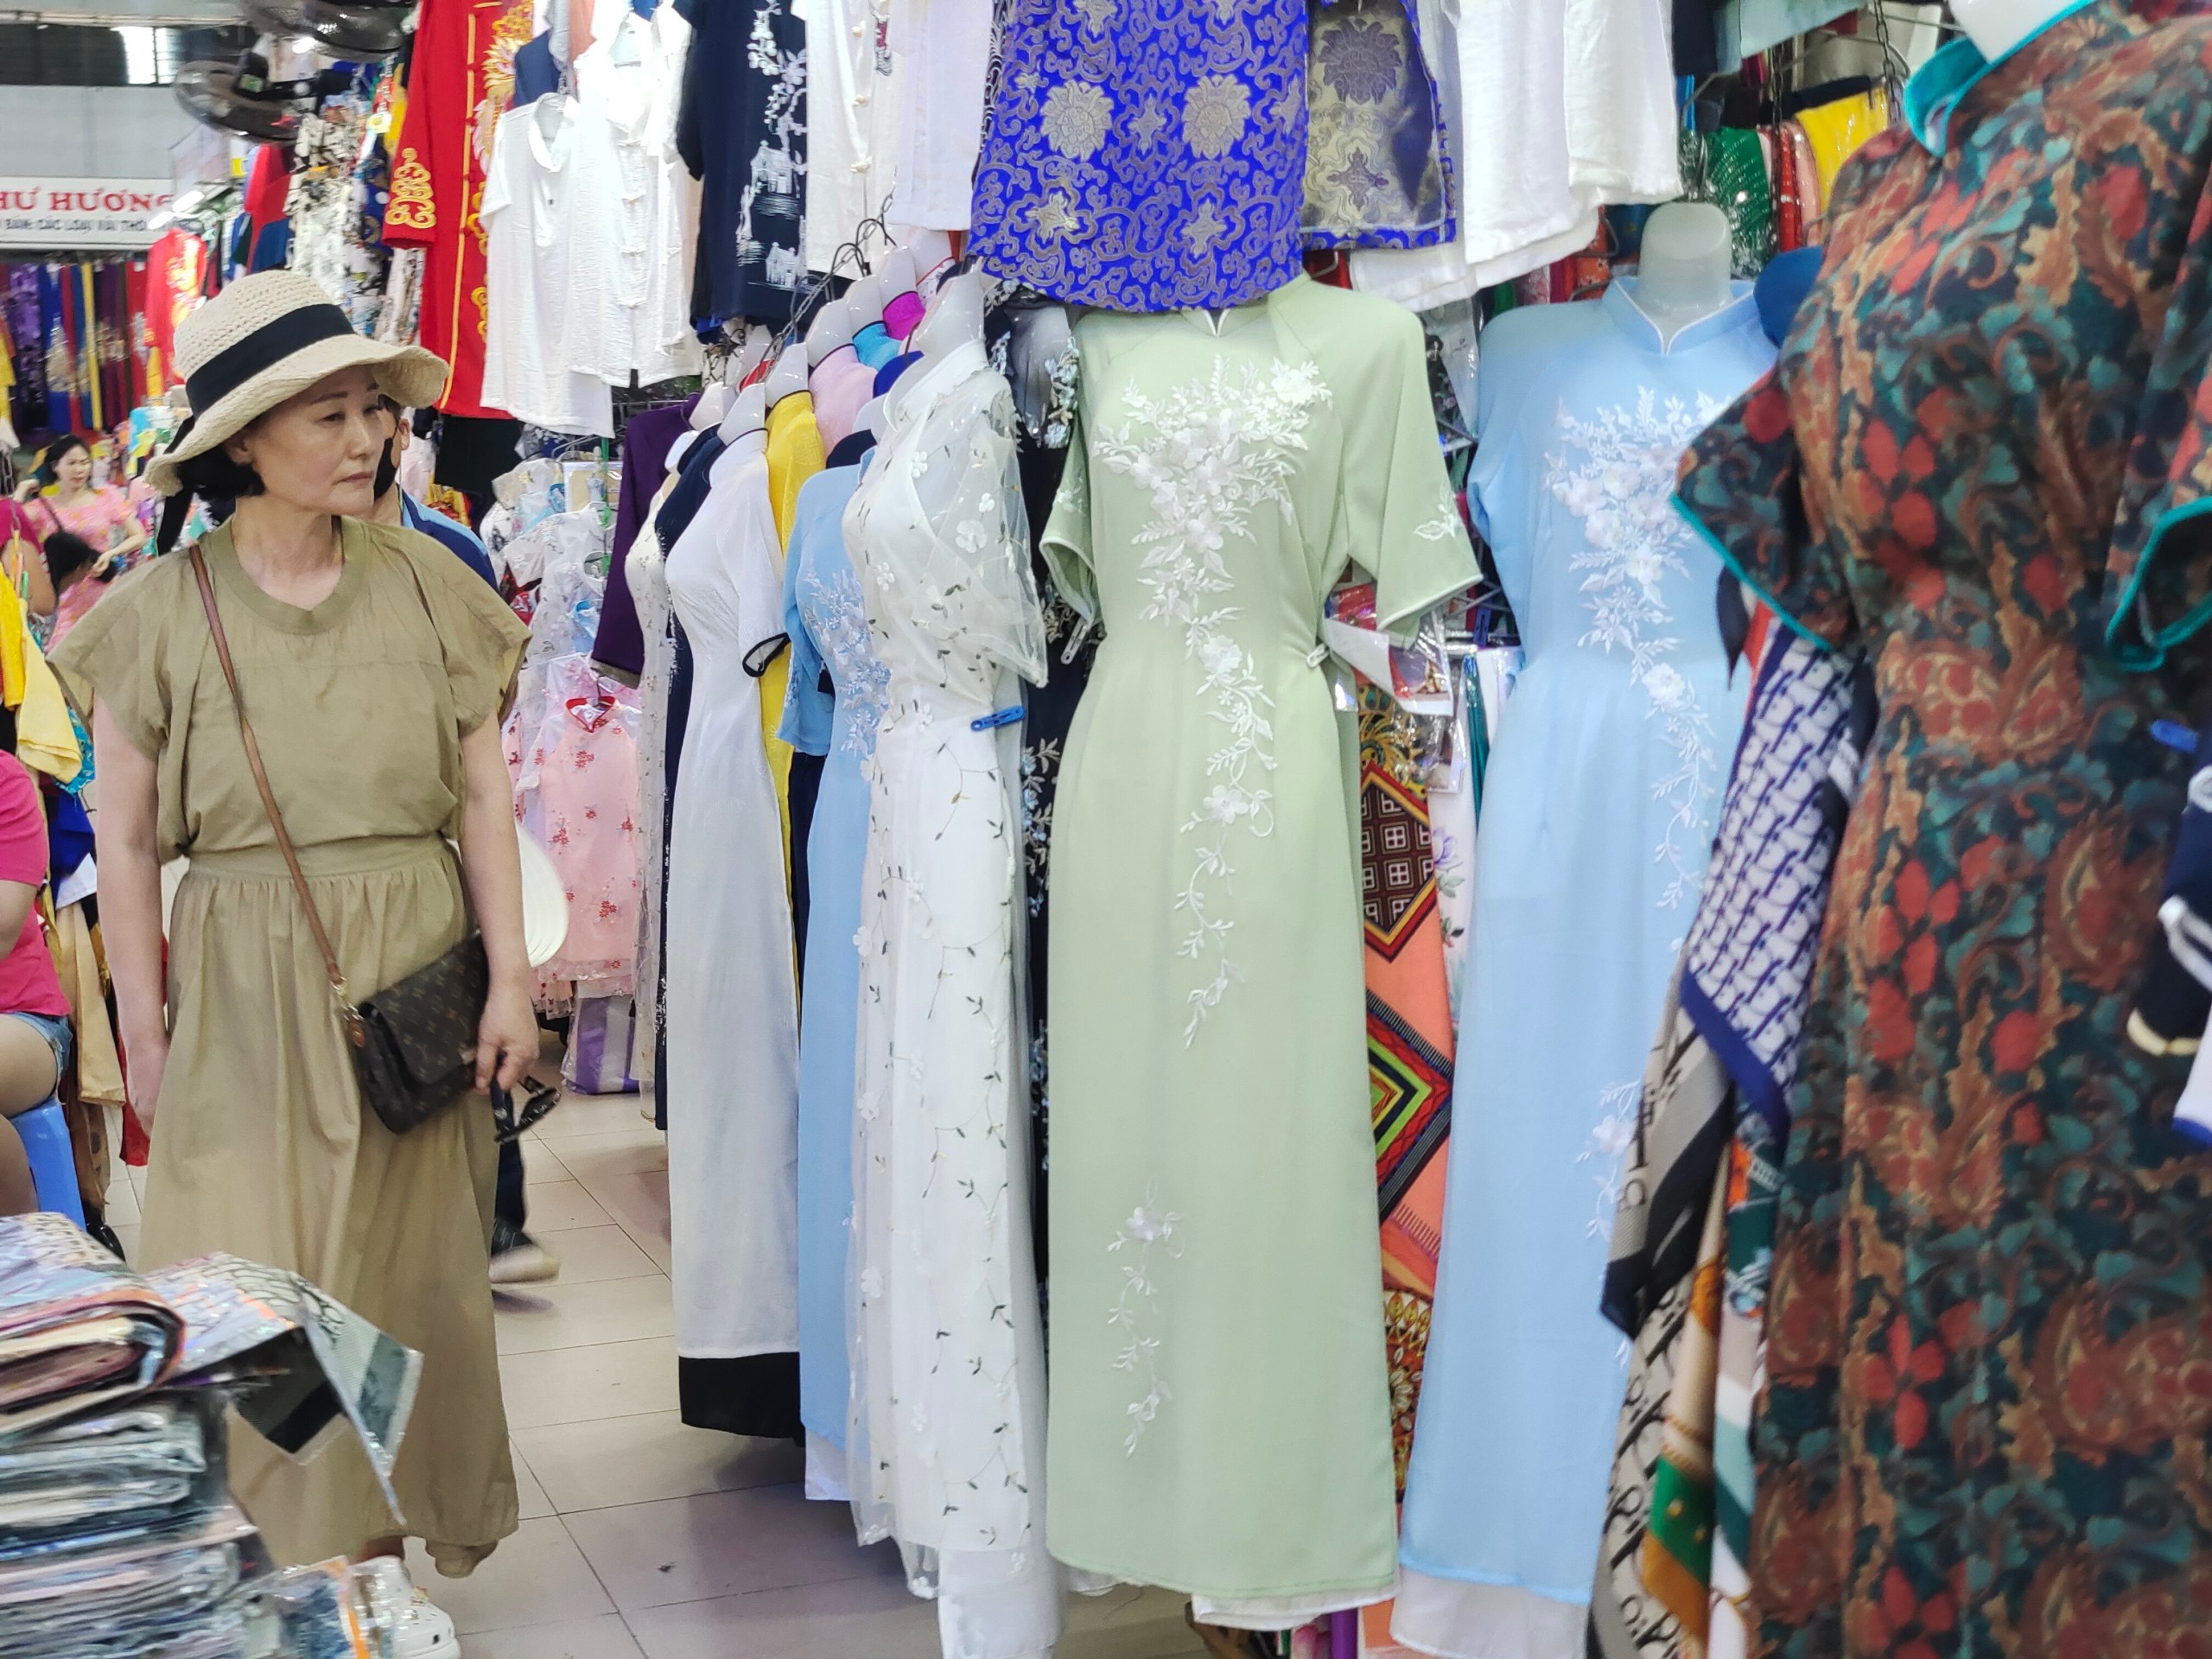 A foreign tourist visiting the Han Market is quite interested in the Vietnamese ‘ao dai’ designs on display for sale and rent. Photo: DIEP NHU